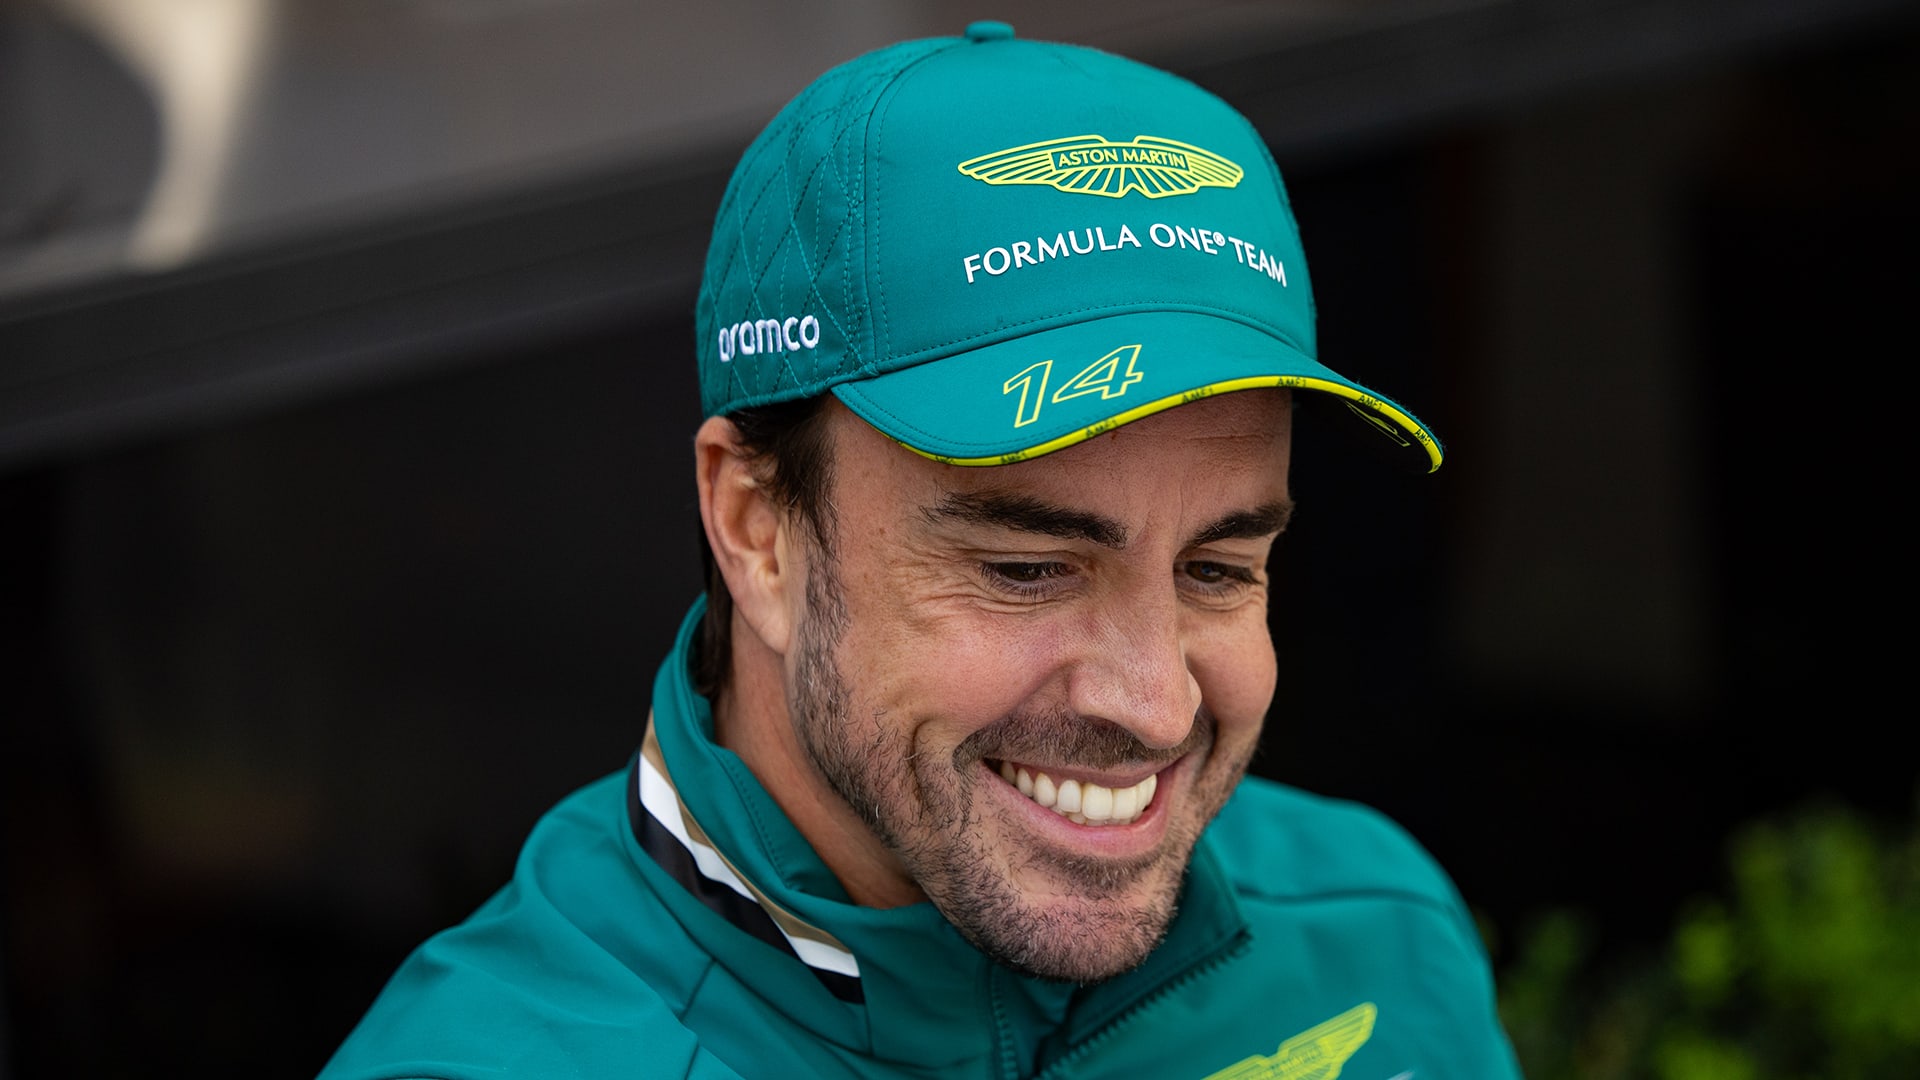 Fernando Alonso to Sign Two-Year Deal with Aston Martin and Take on Ambassadorial Role